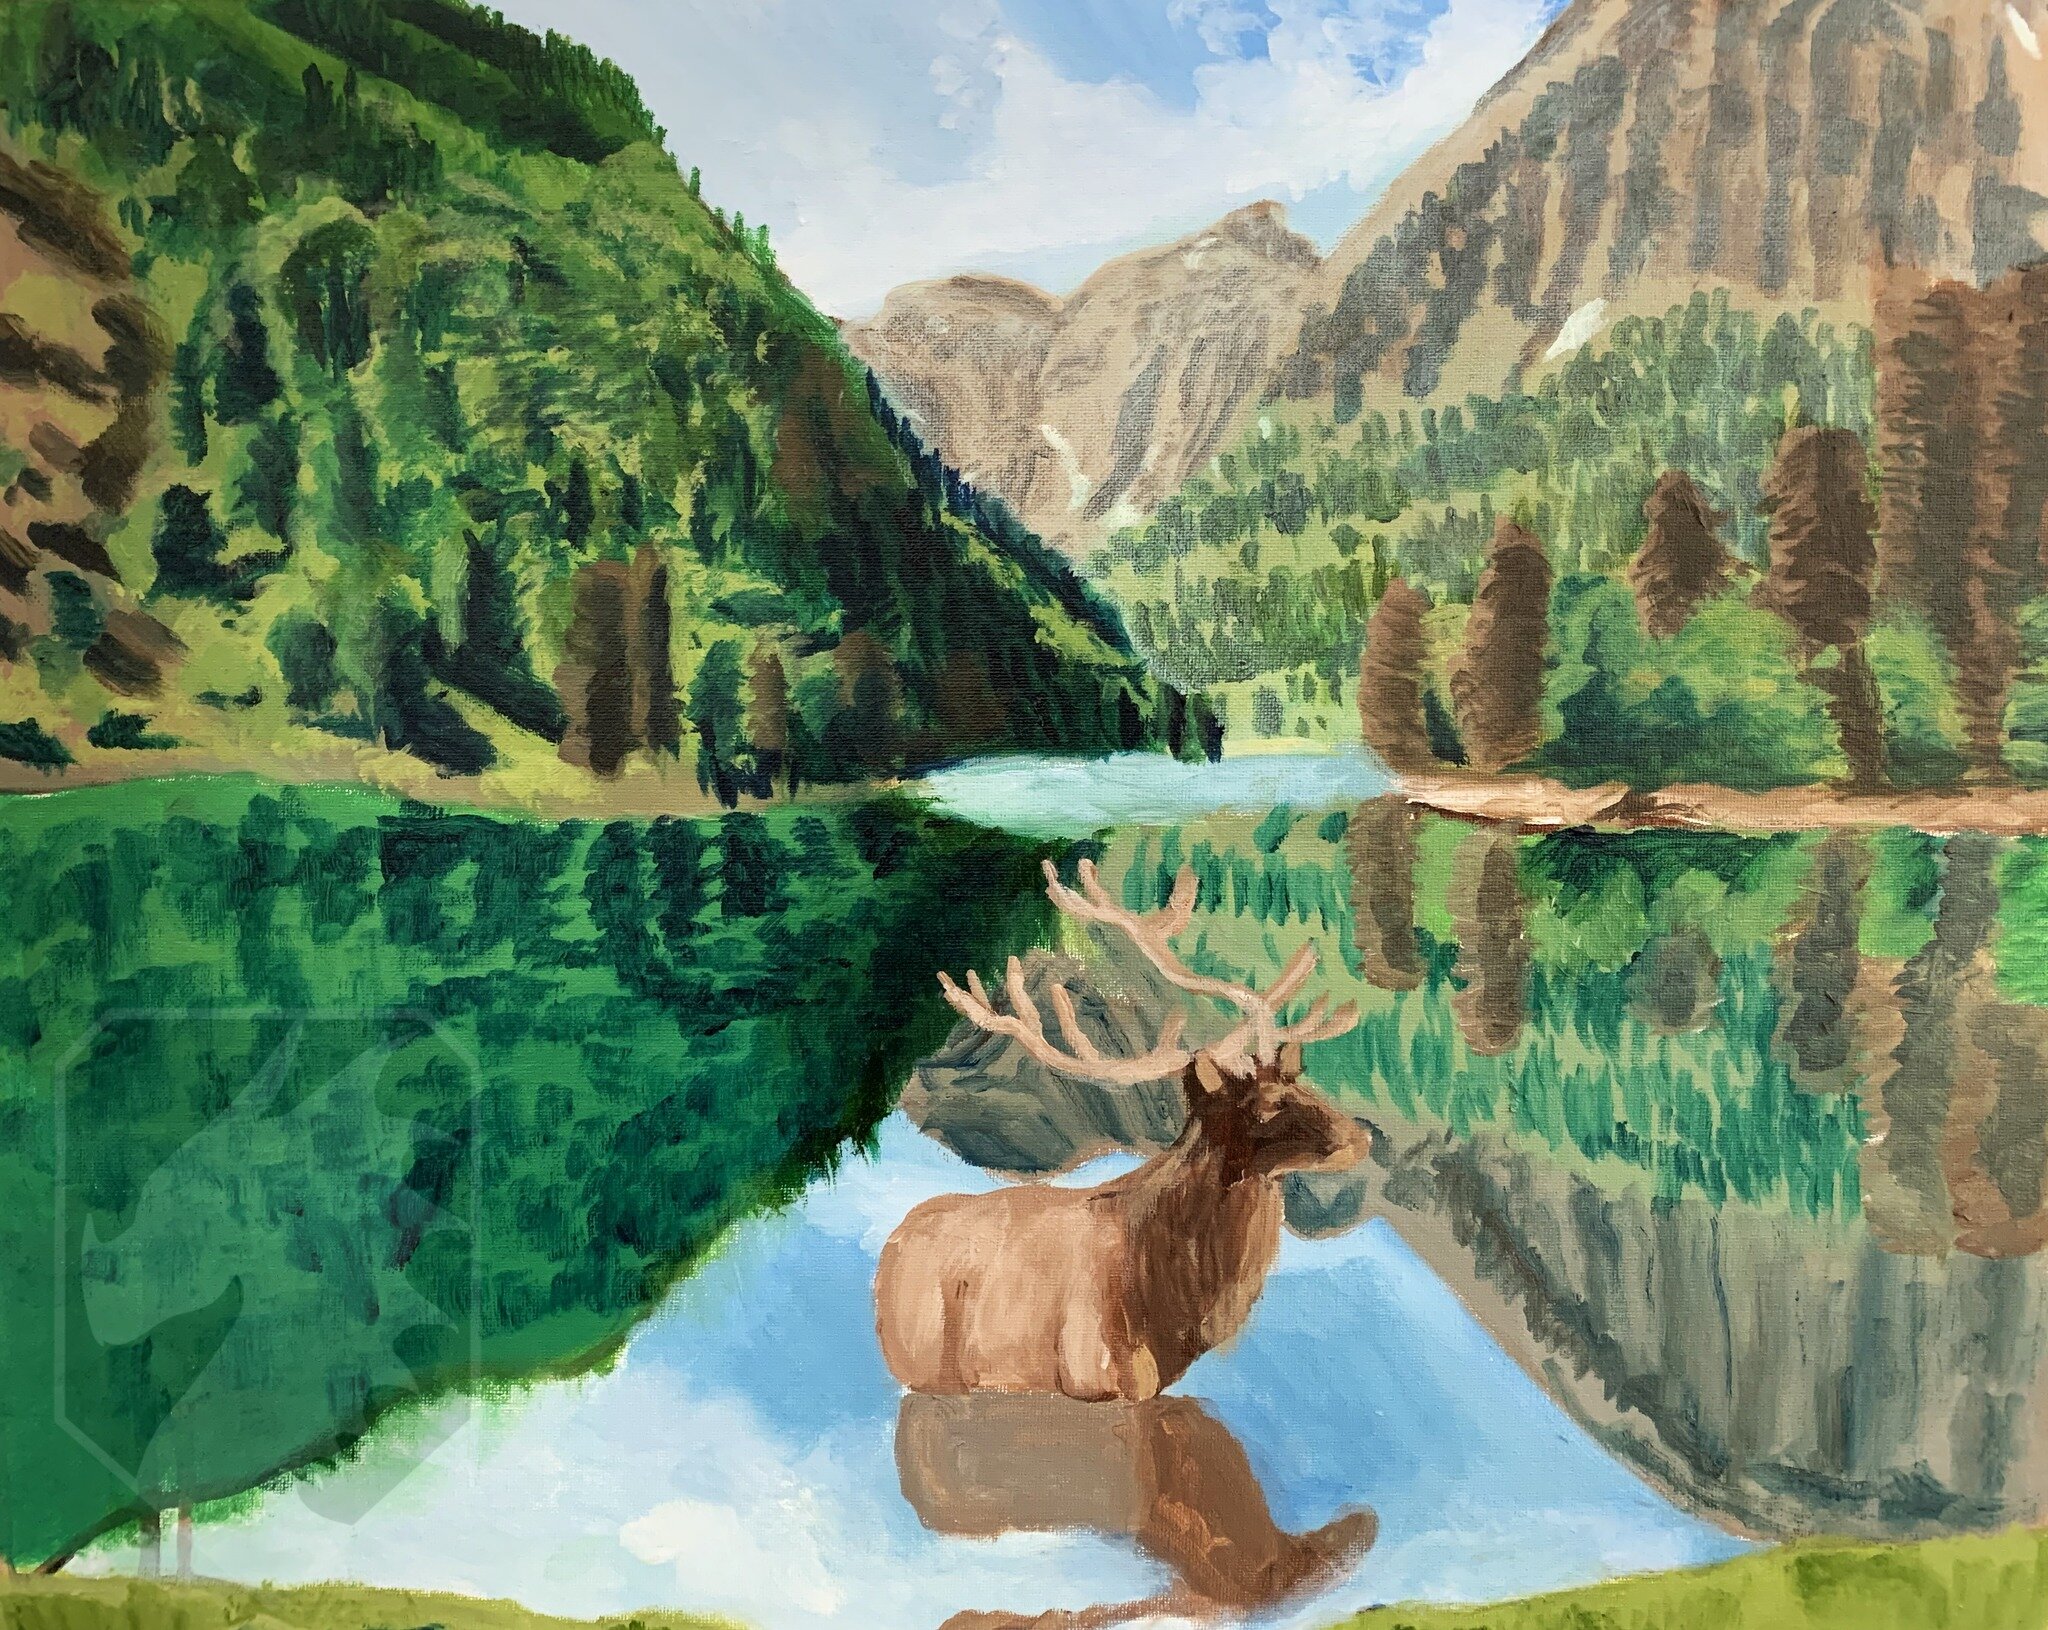 Take a look at this stunning oil painting I created of a mountain landscape with an elk in a lake! I'm selling this one-of-a-kind piece, and it would make a great addition to any art collection. If you're interested in purchasing it, send me a messag